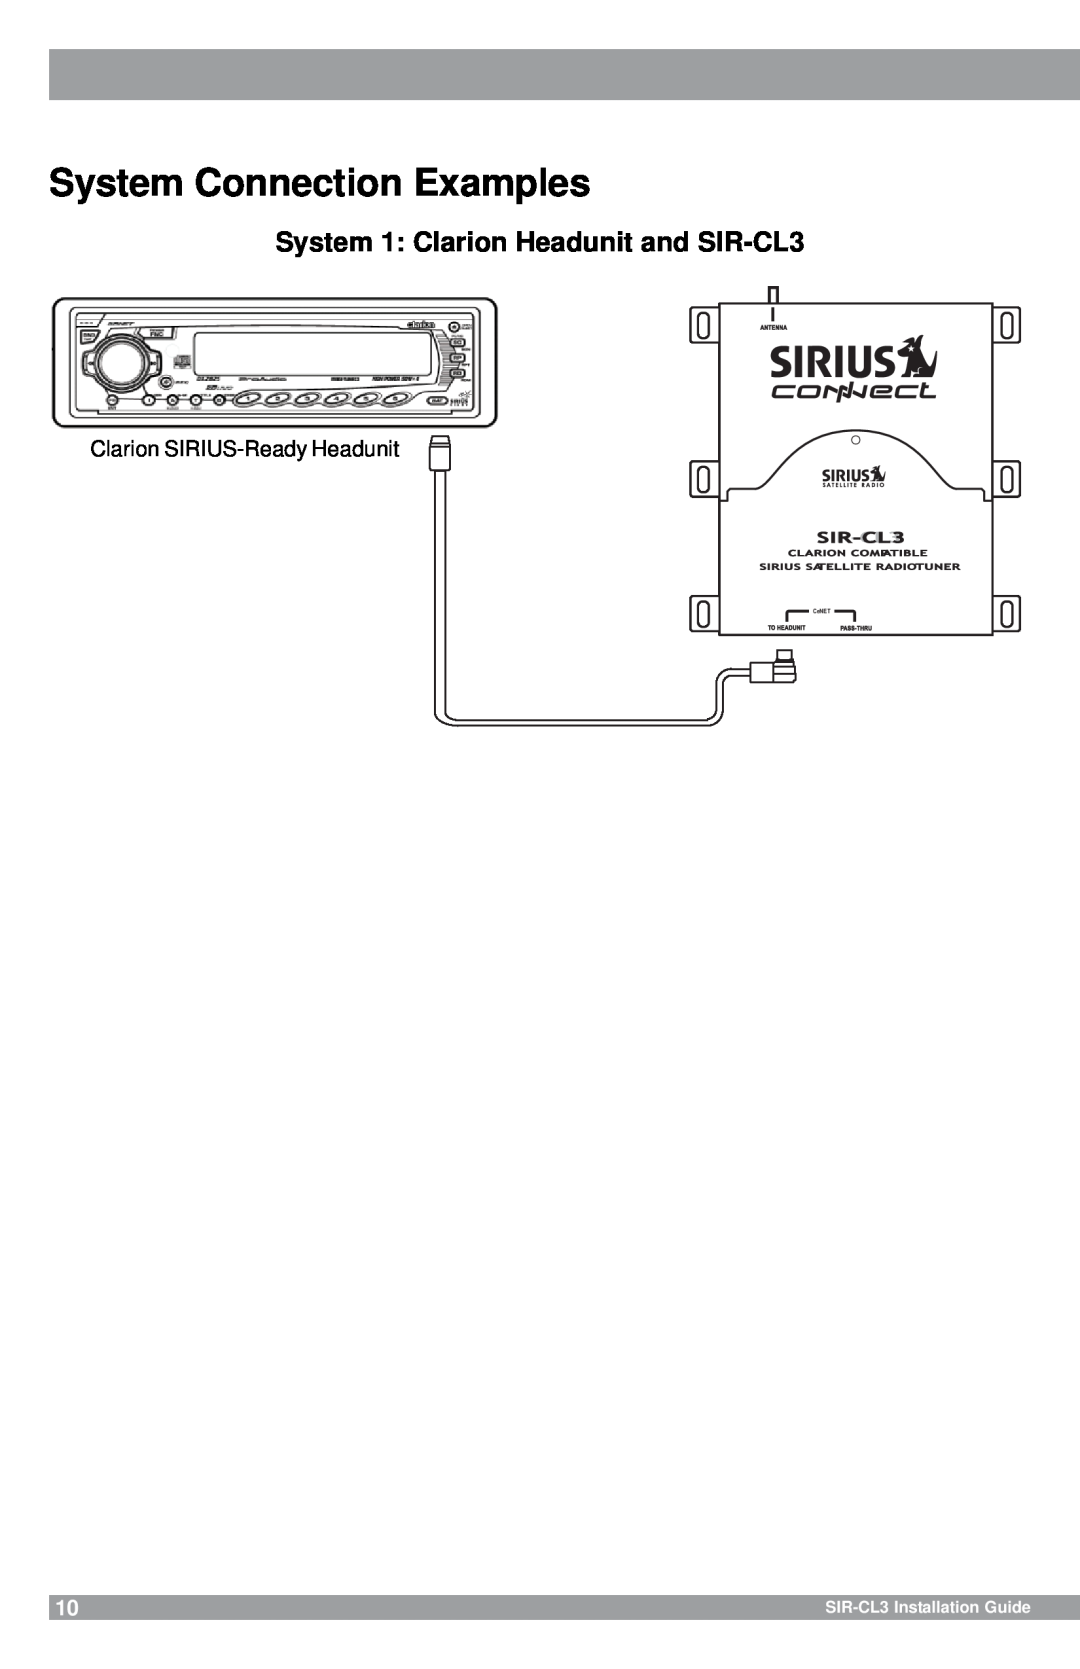 Sirius Satellite Radio System Connection Examples, System 1 Clarion Headunit and SIR-CL3, Clarion SIRIUS-ReadyHeadunit 